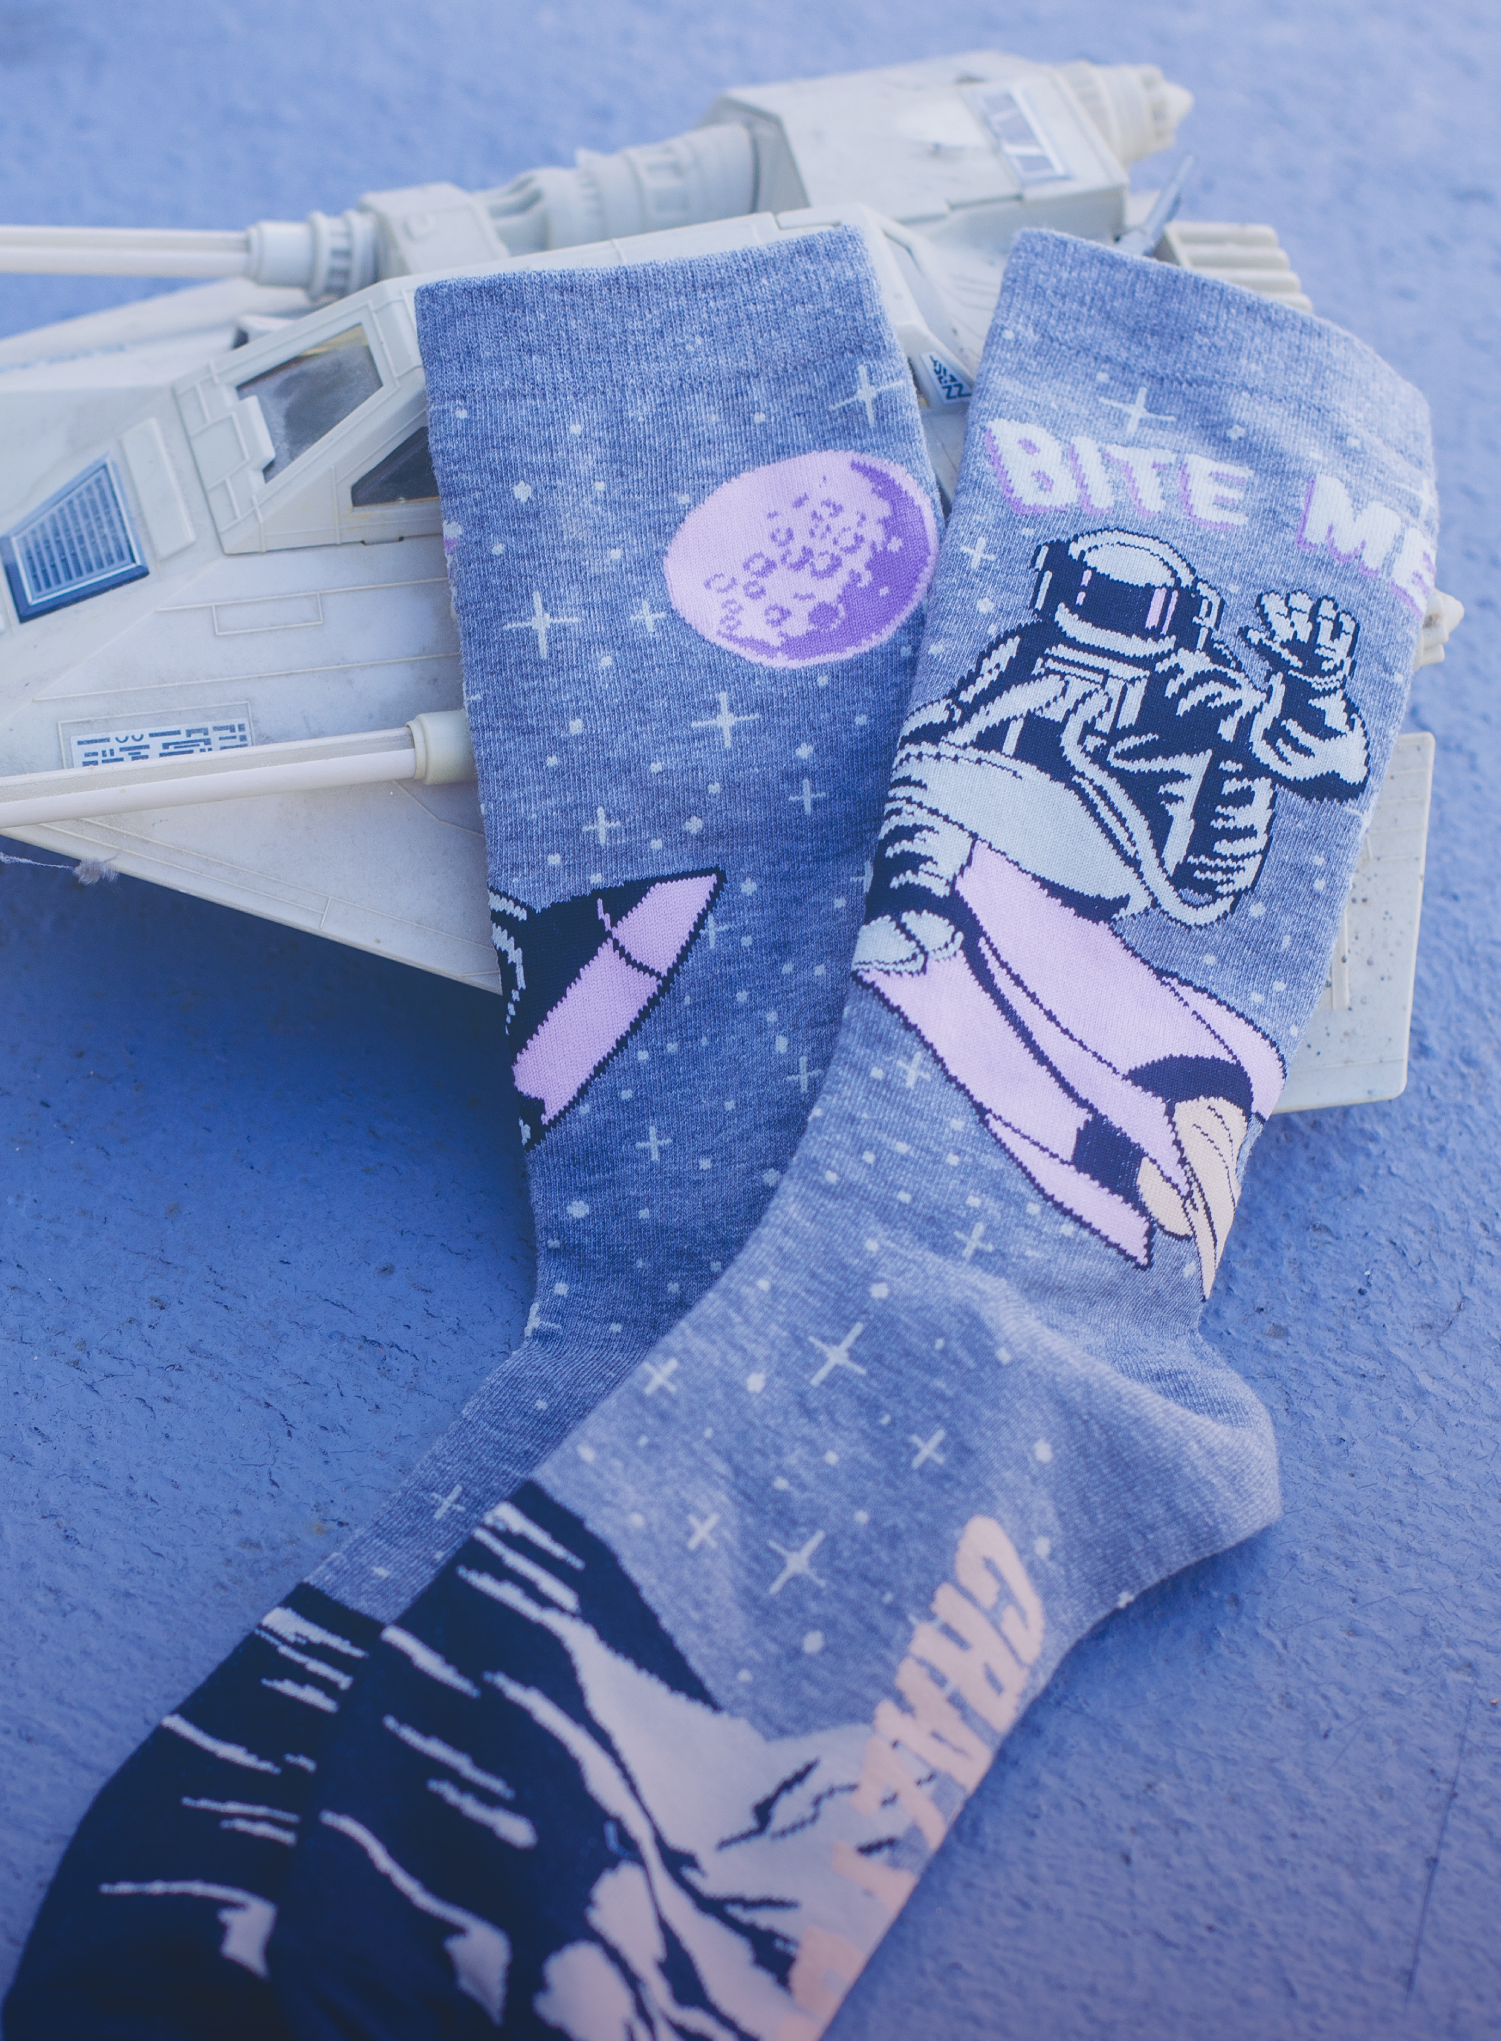 Blue socks with an astronaut riding a spaceship design, placed on top of a toy spaceship  